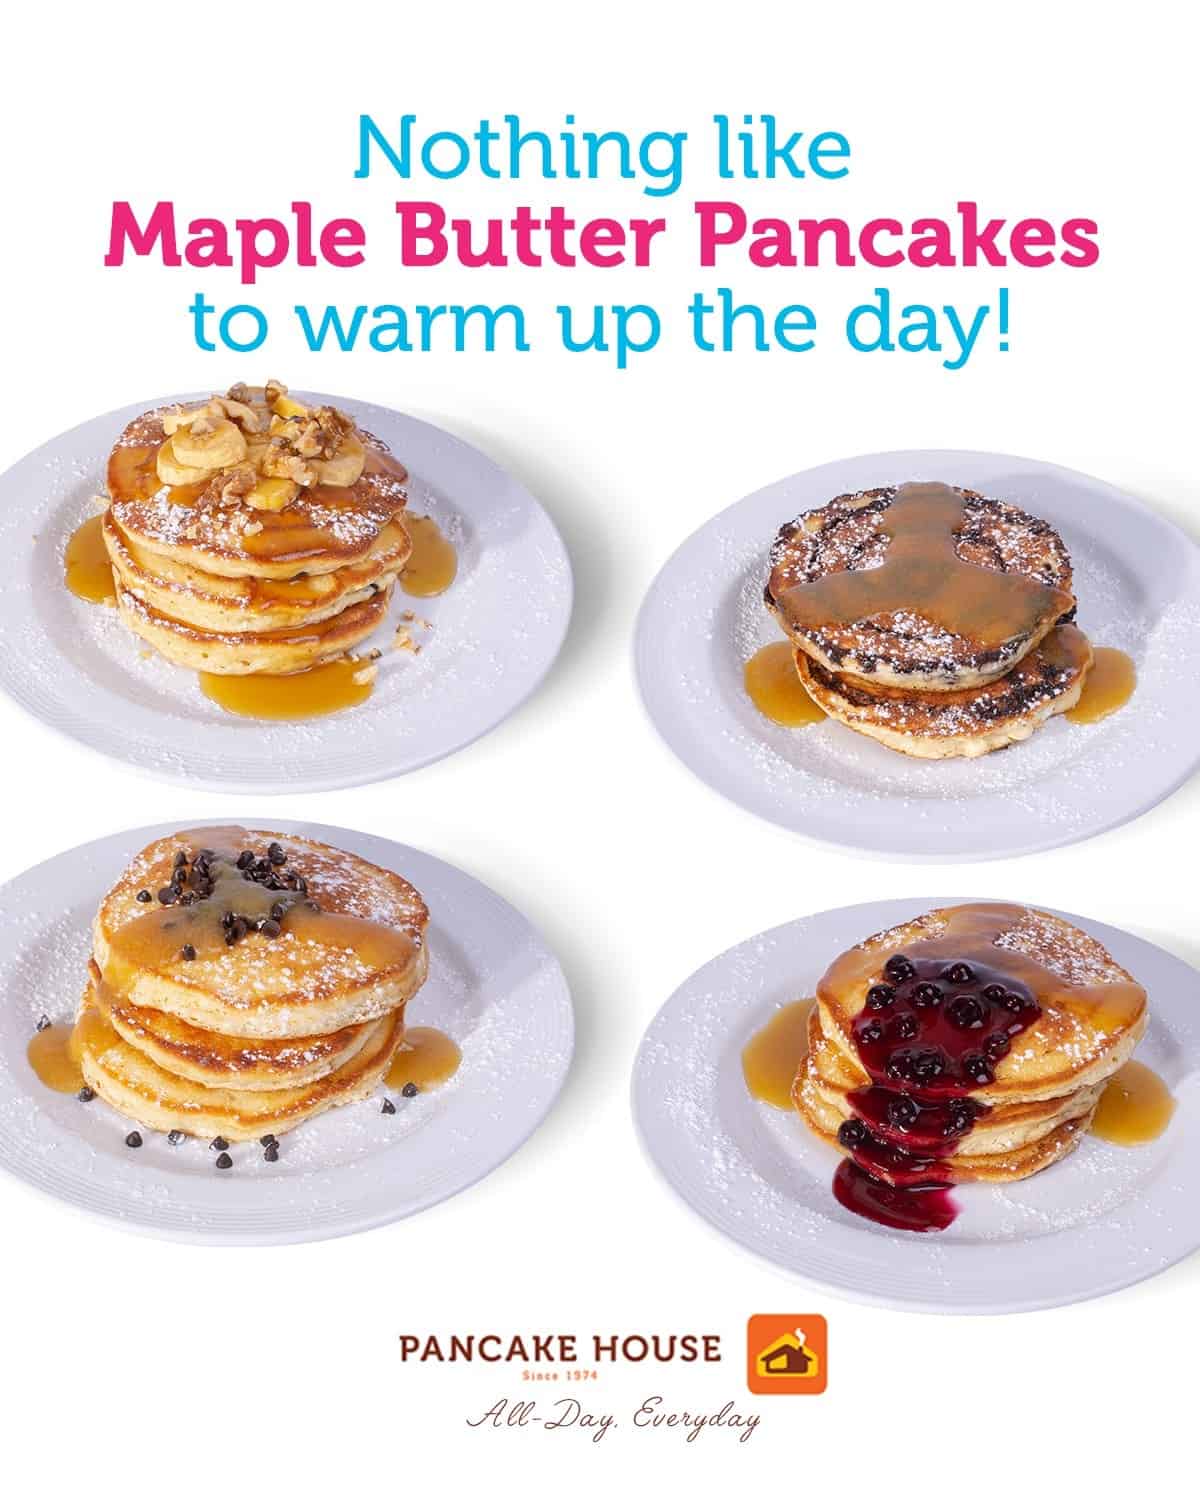 Different variety of tasty foods on the pancake house menu